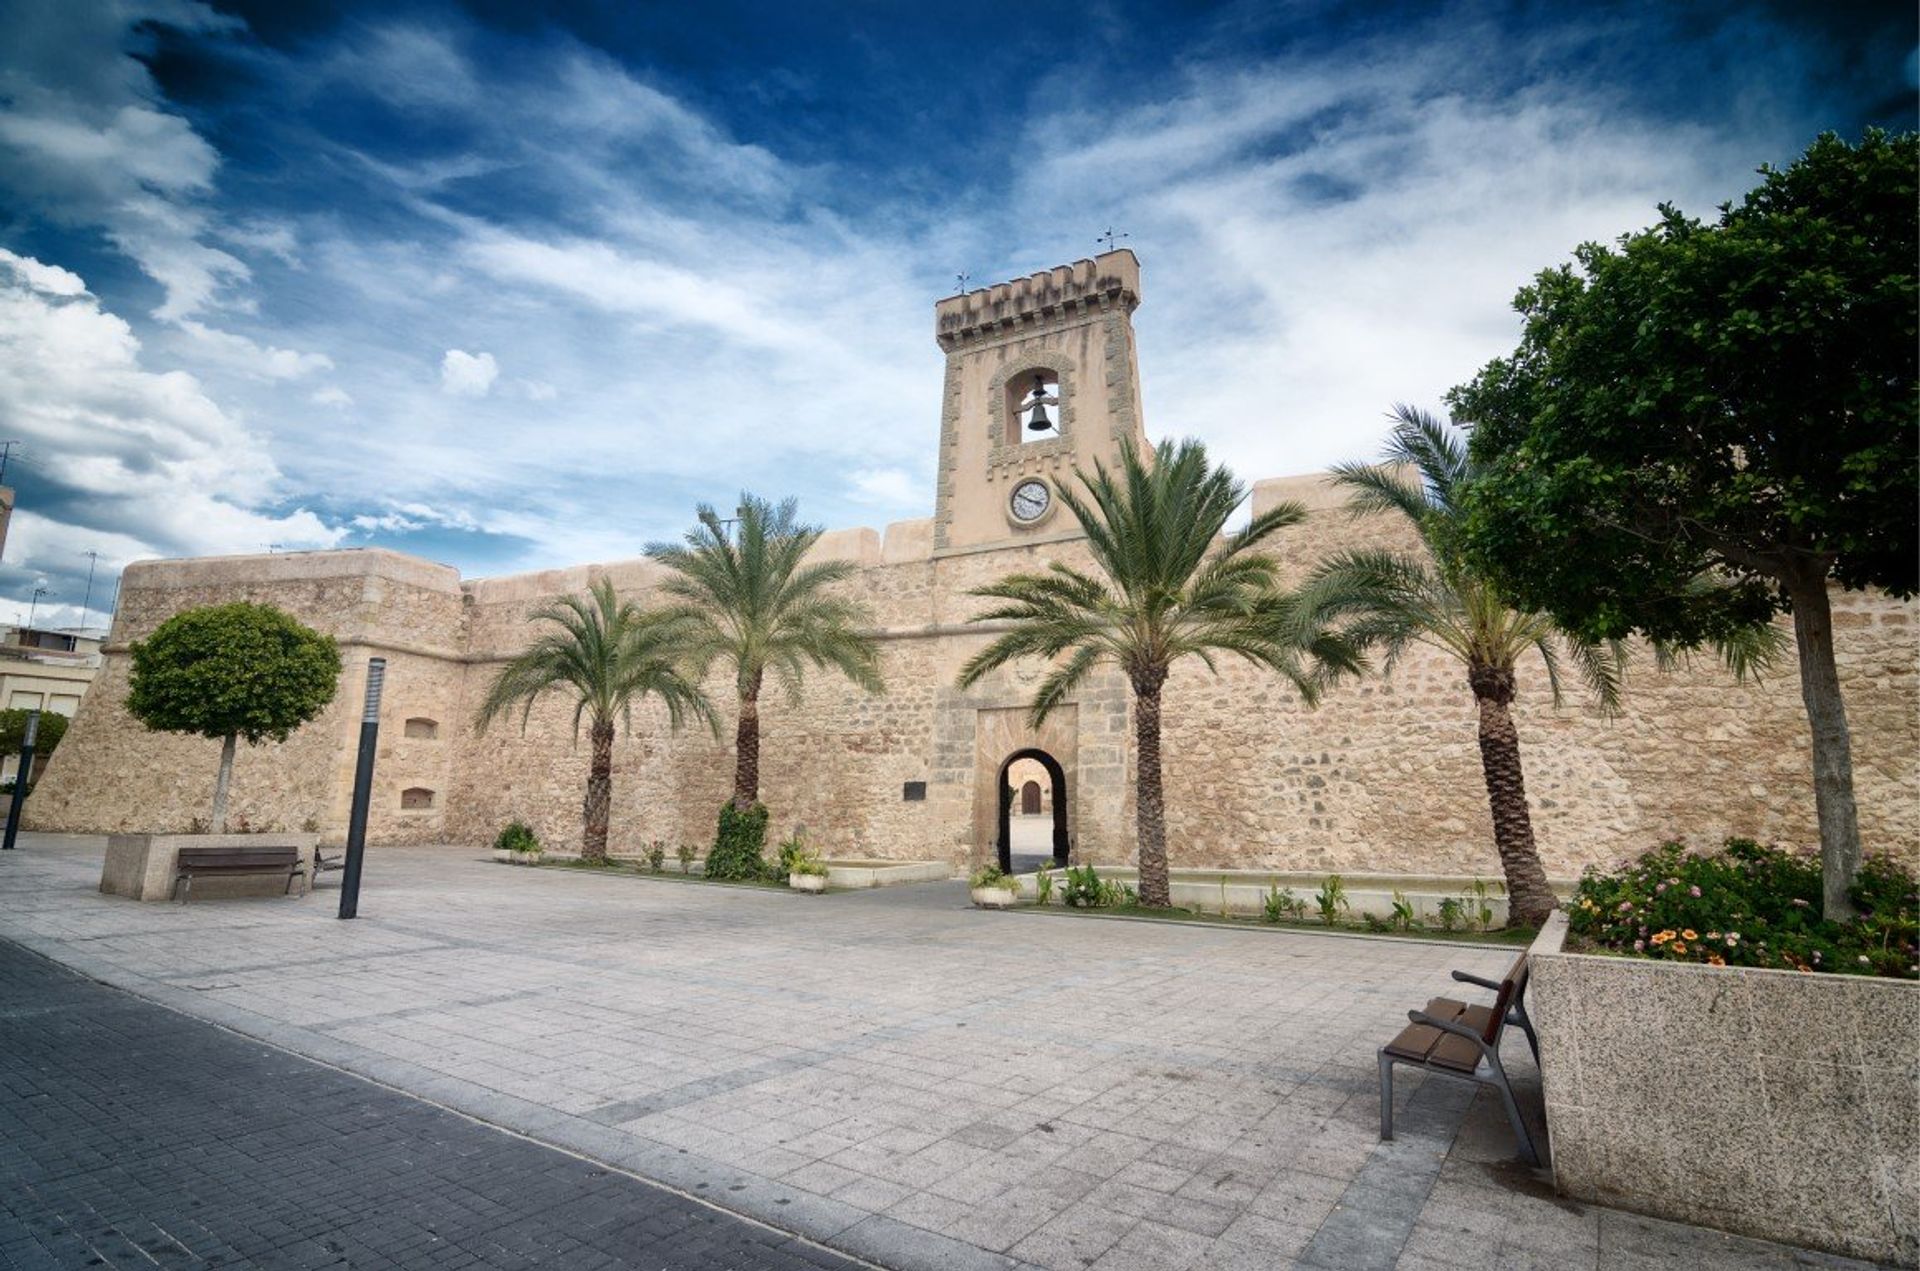 Altamira Castle in Elche is also a concert venue in the summer, just a 15 minute drive from Santa Pola